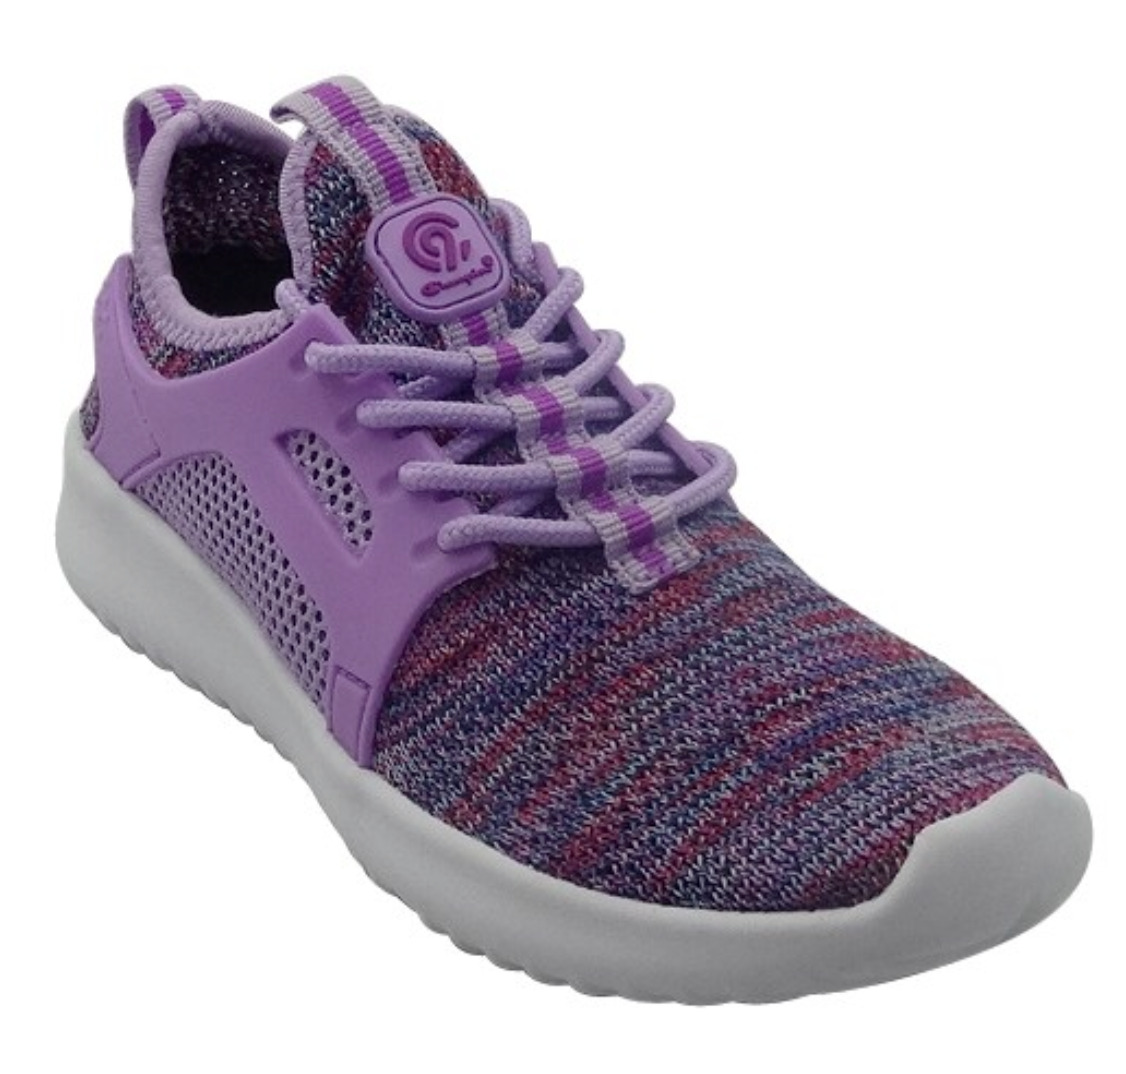 C9 by Champion *C9 Champion Youth Girls Poise 2 Lilac SpeedKnit Mesh Athletic Sneaker, Purple